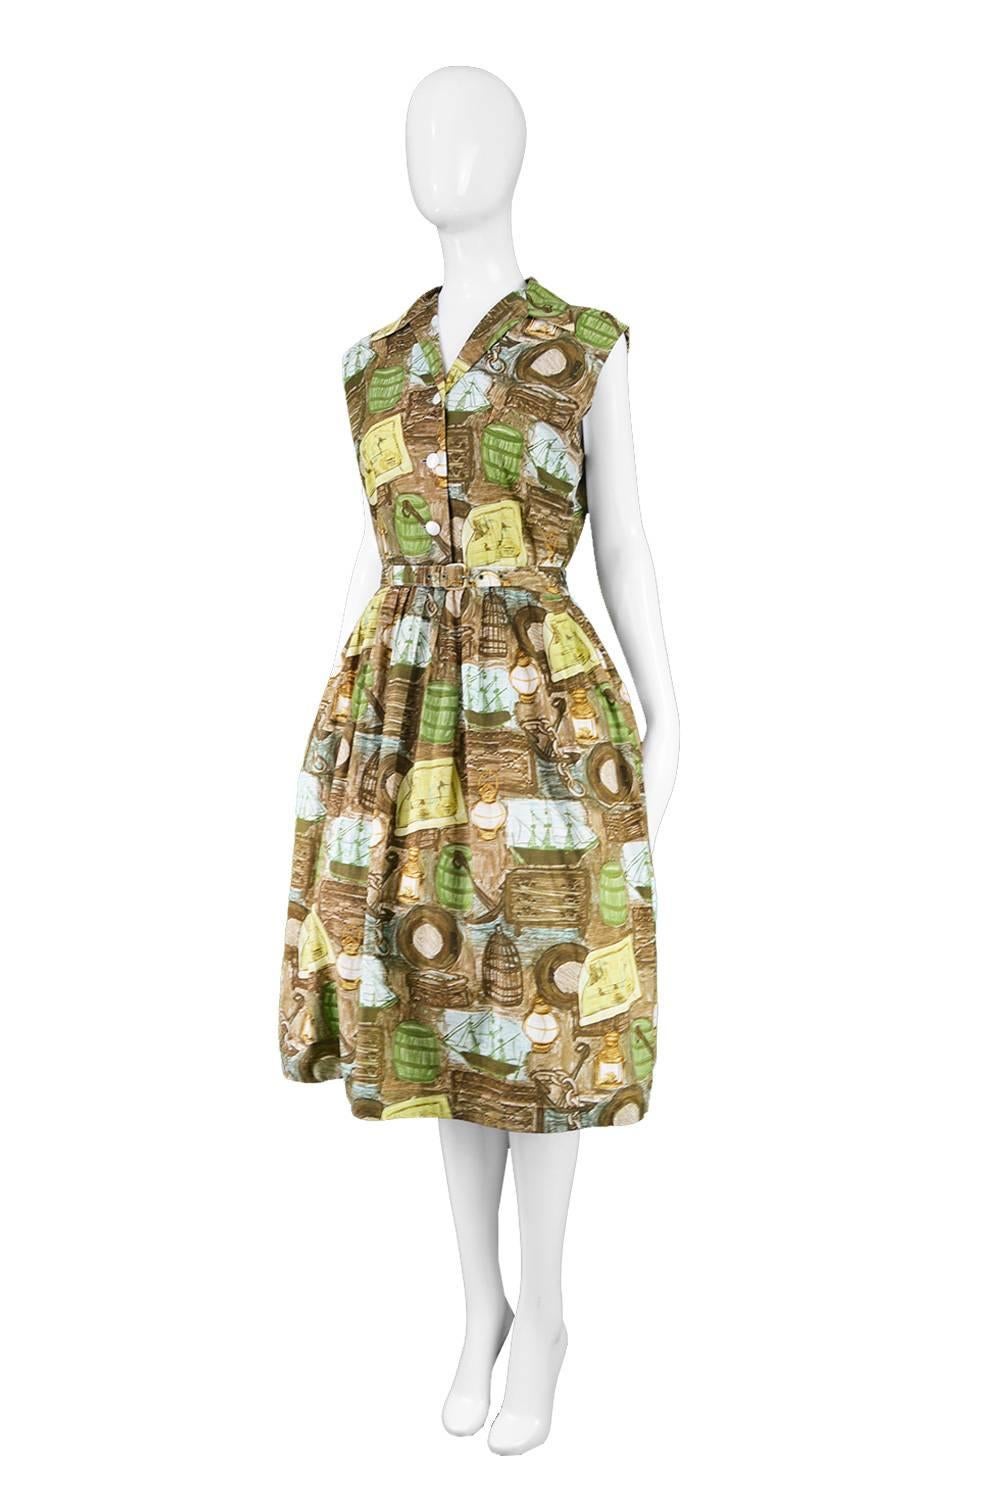 Women's Novelty Print Nautical Theme Brown and Green Vintage Cotton Dress, 1950s  For Sale